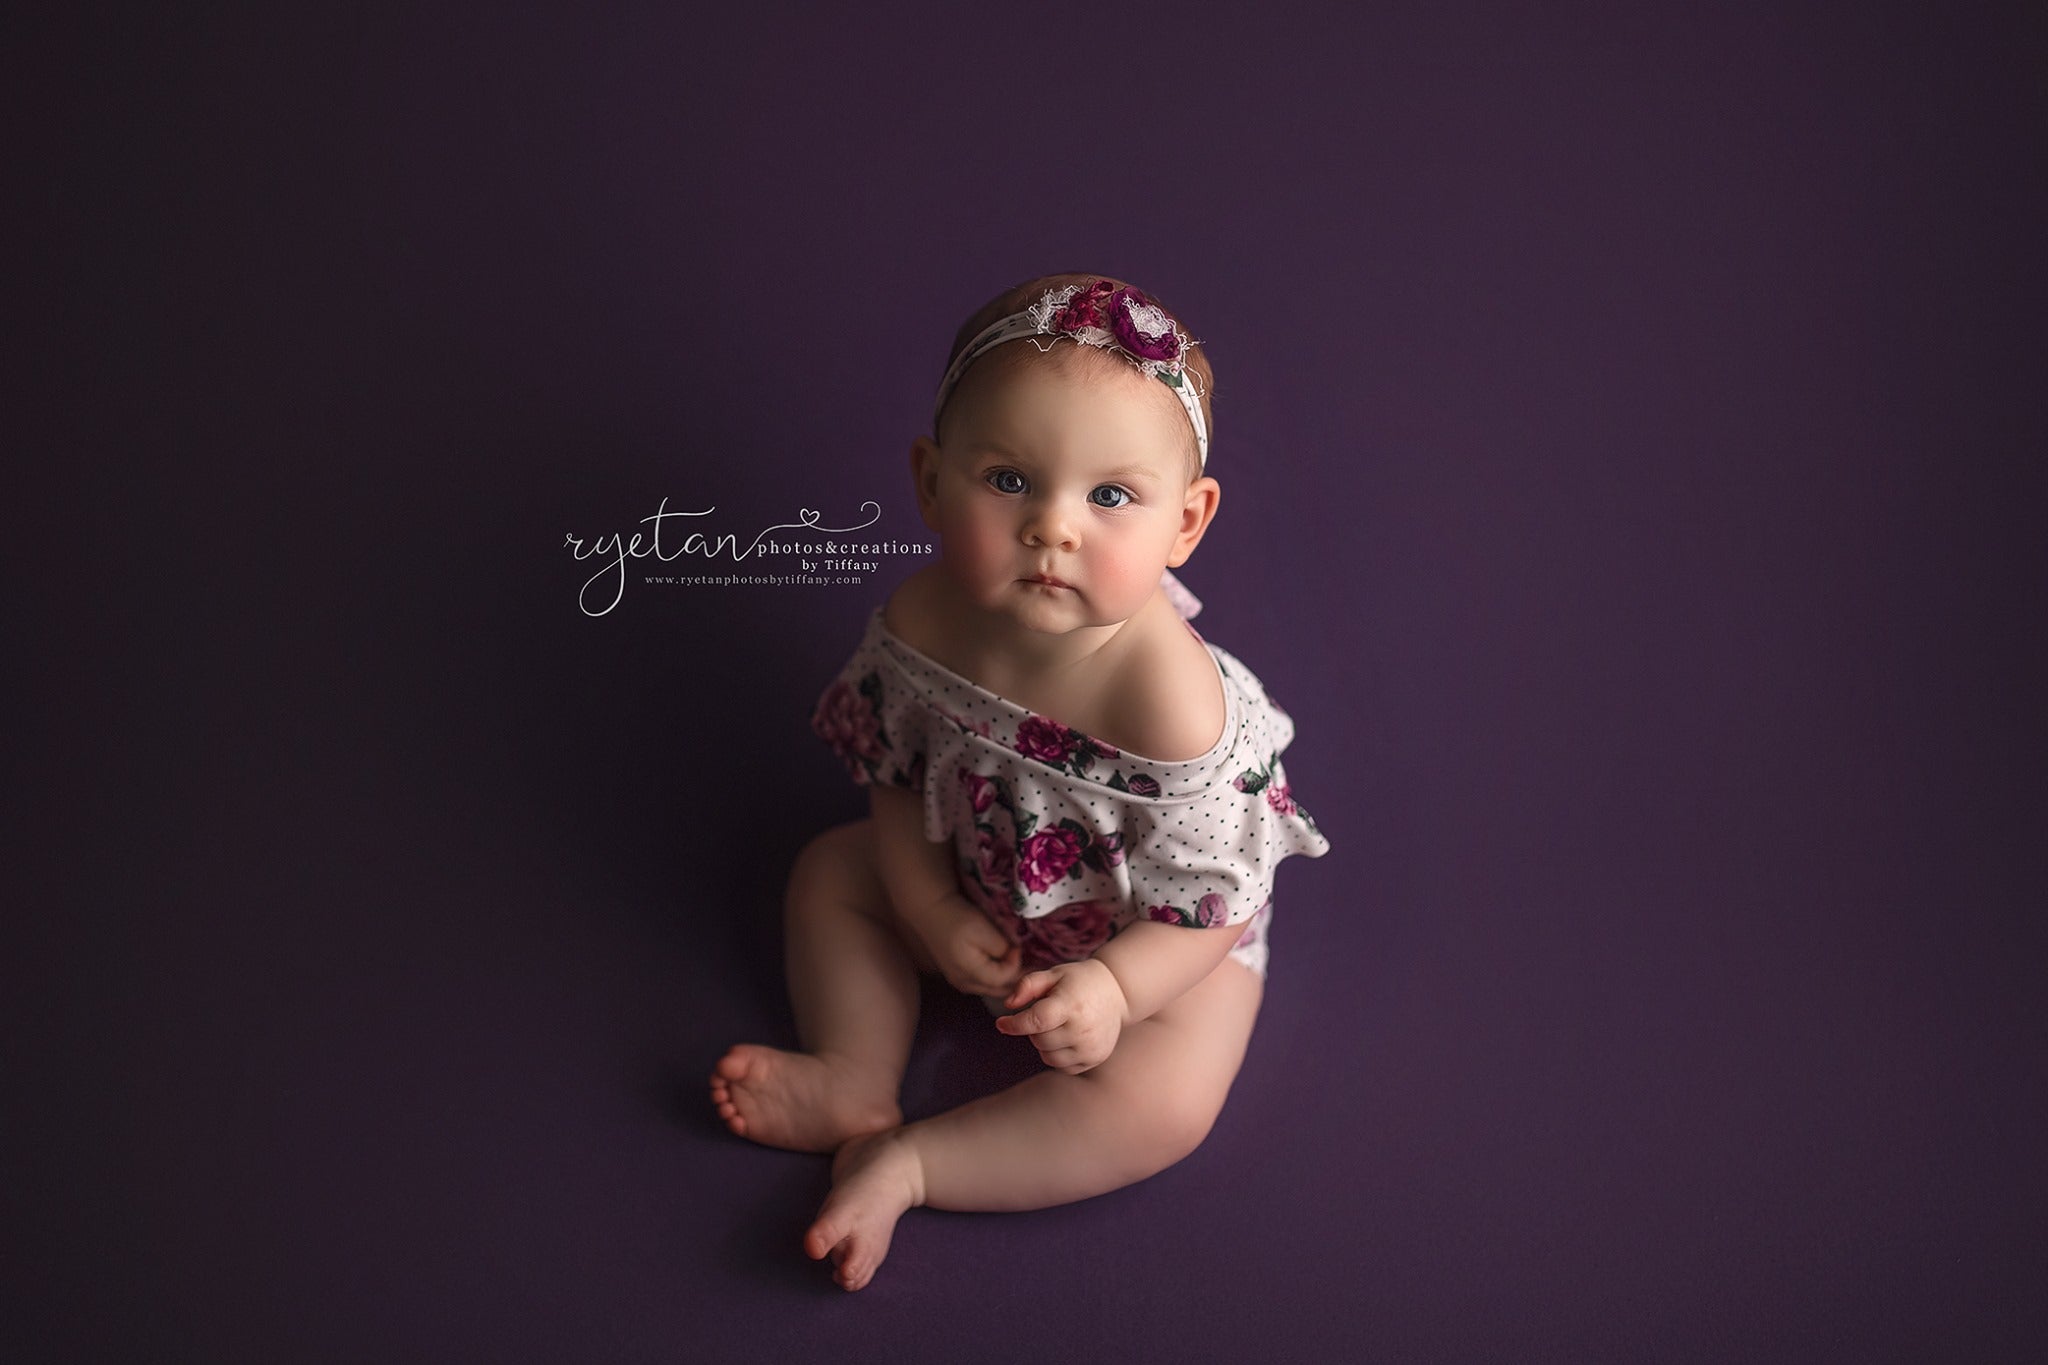 Lilly Romper; Newborn to sitter; Dainty Pink on Ivory Floral- MADE TO ORDER